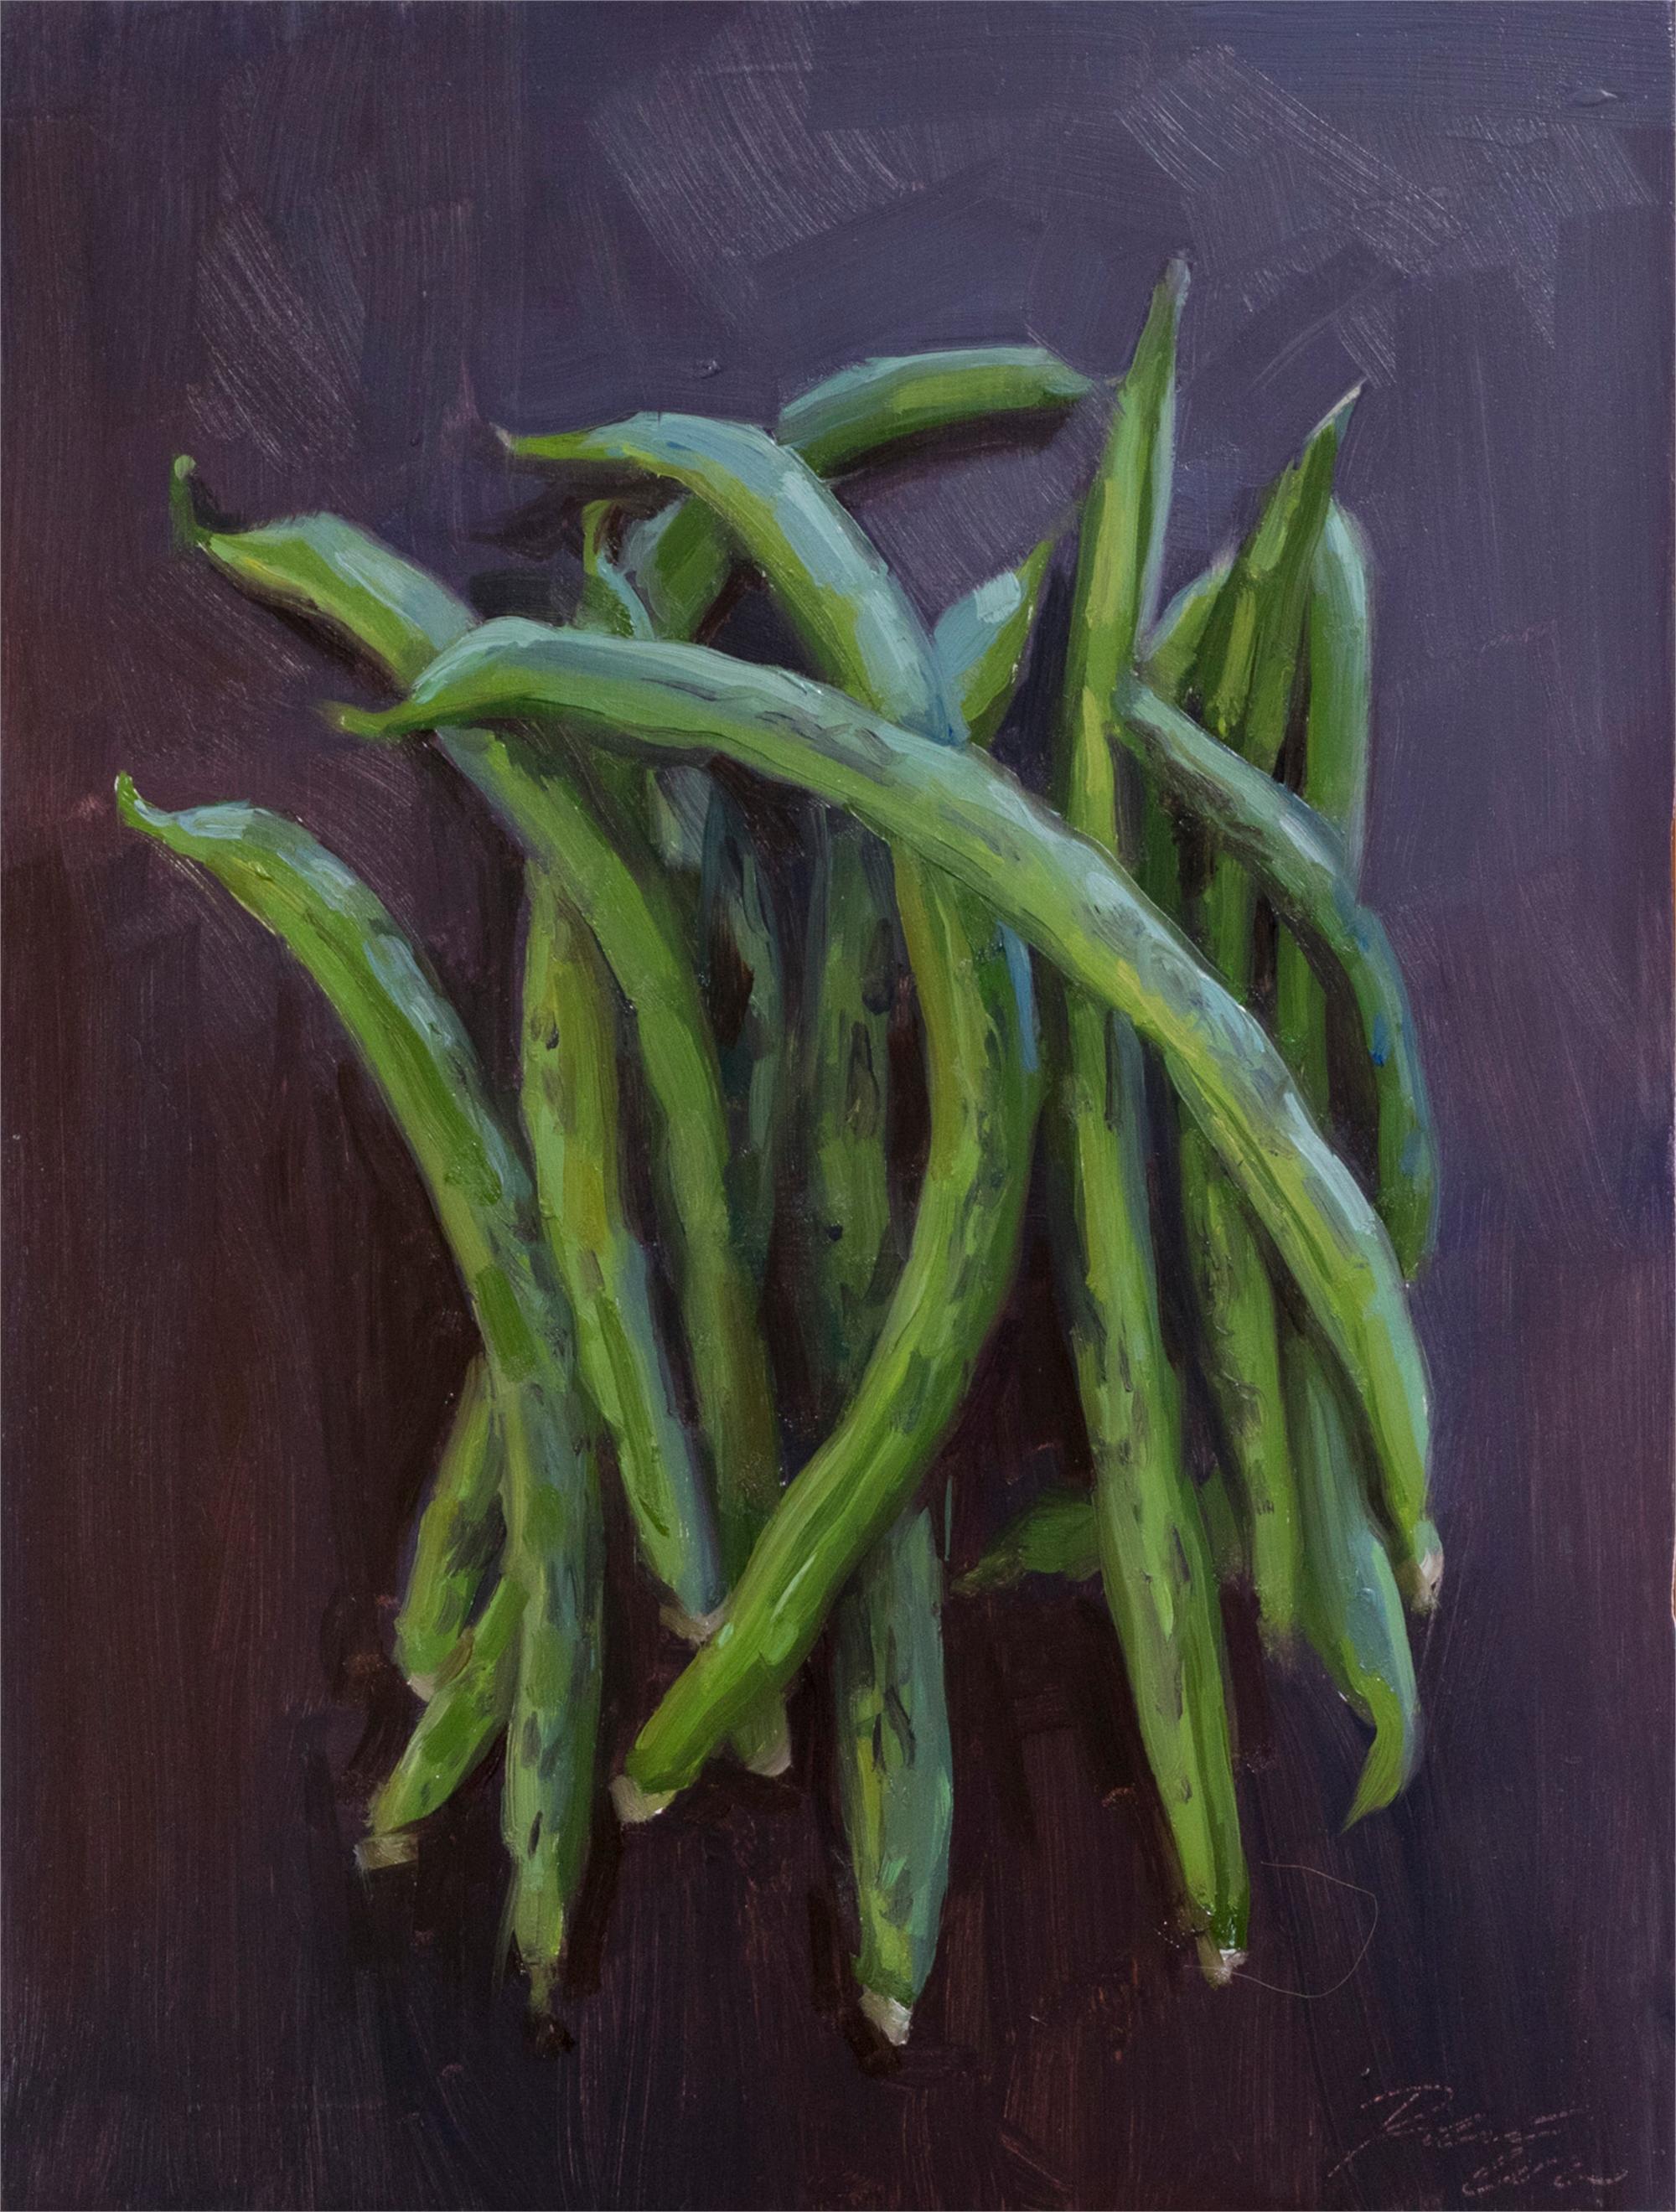 Green Beans, Oil Painting